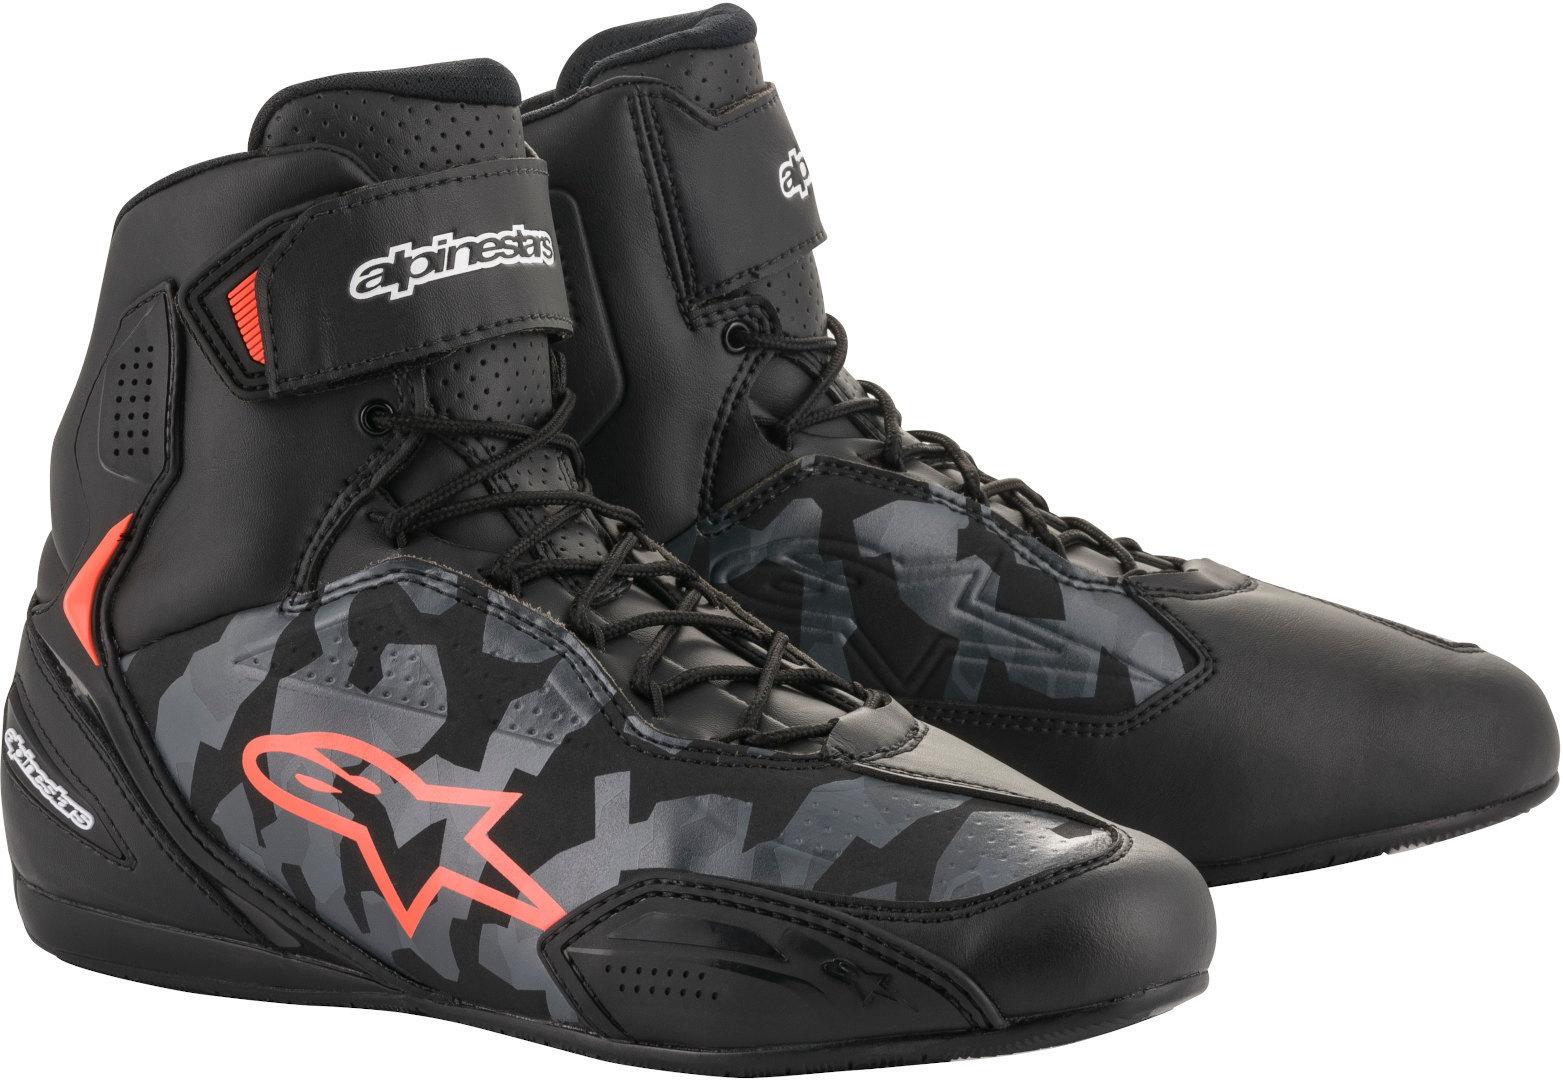 Alpinestars Faster-3 Camo Motorcycle Shoes, green-brown, Size 42, green-brown, Size 42